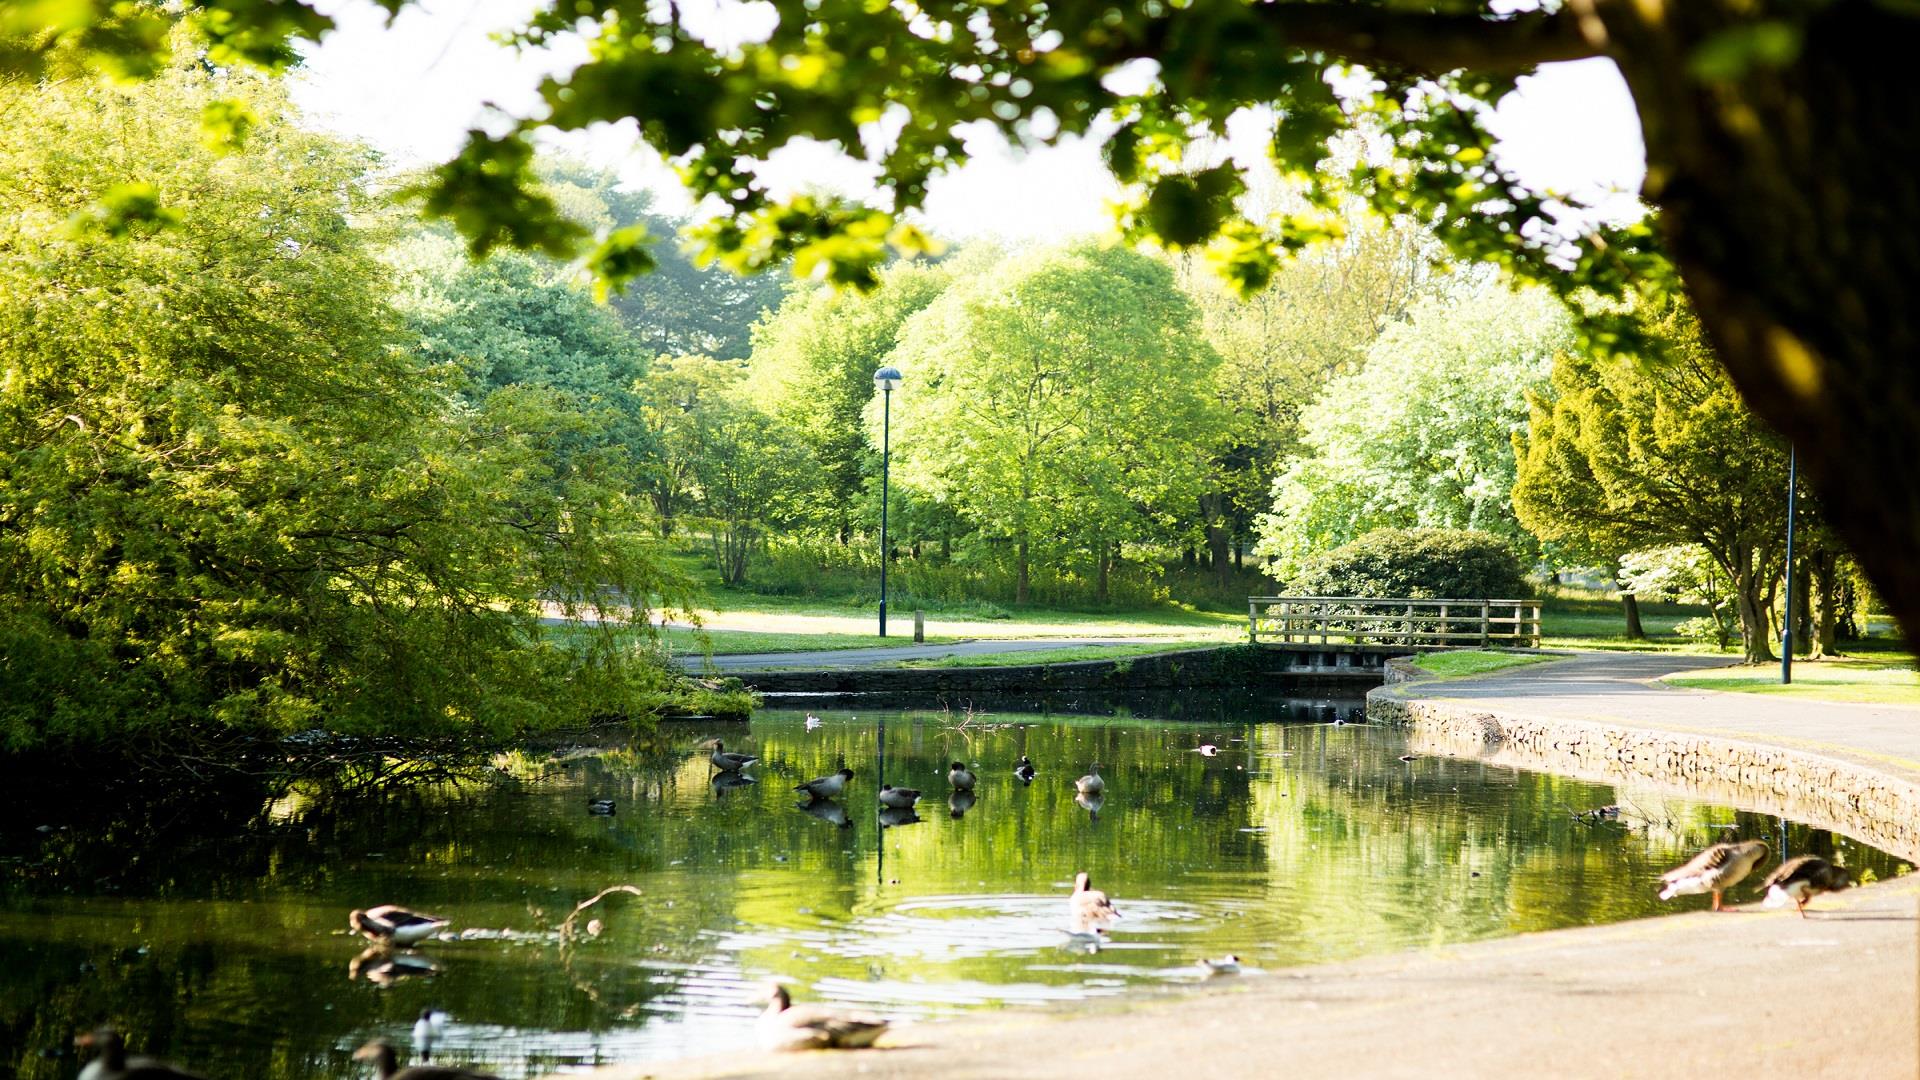 Photo of the Ward Park duck pond and wooden bridge, surrounded by leafy green trees mid summer